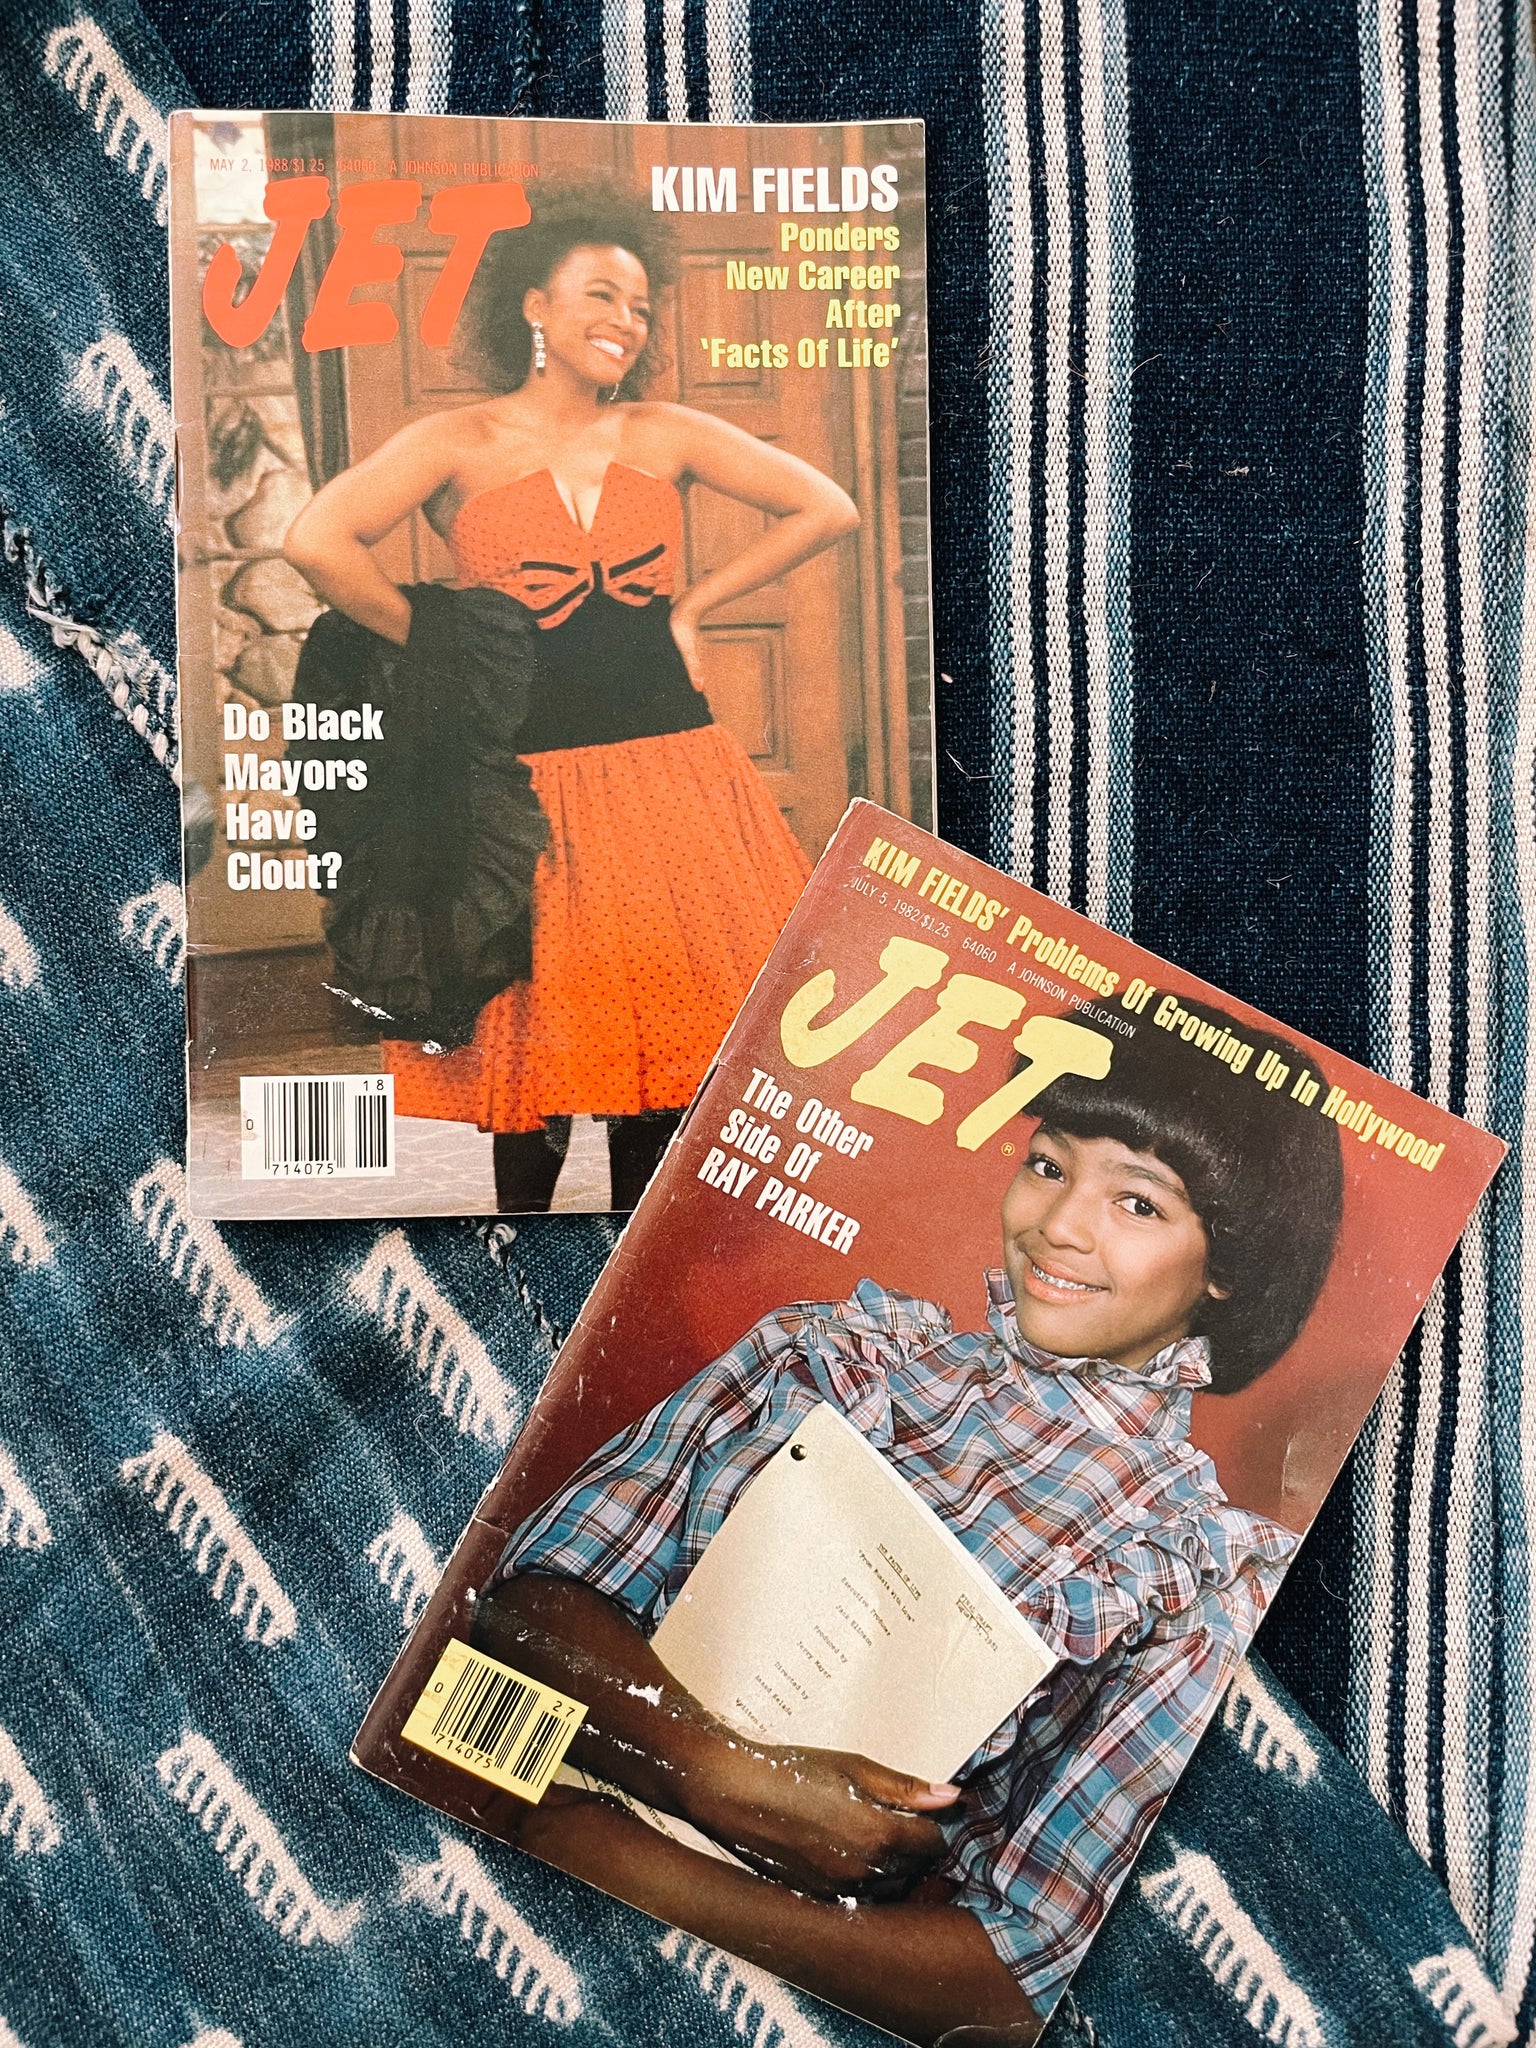 Vintage Magazines// Assorted Covers (Please Select)